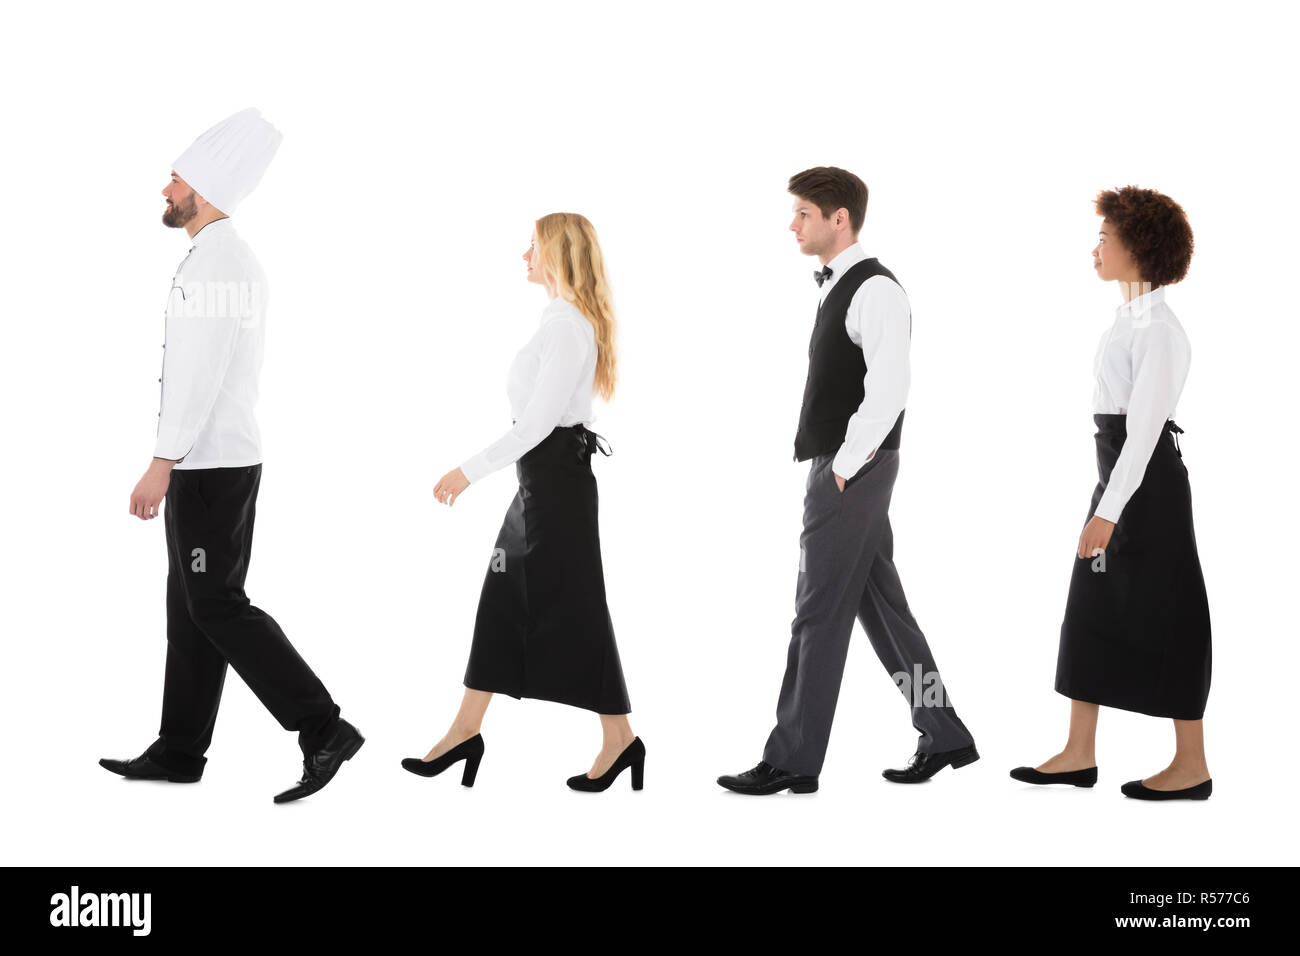 Young Restaurant Staff Walking In Row Stock Photo